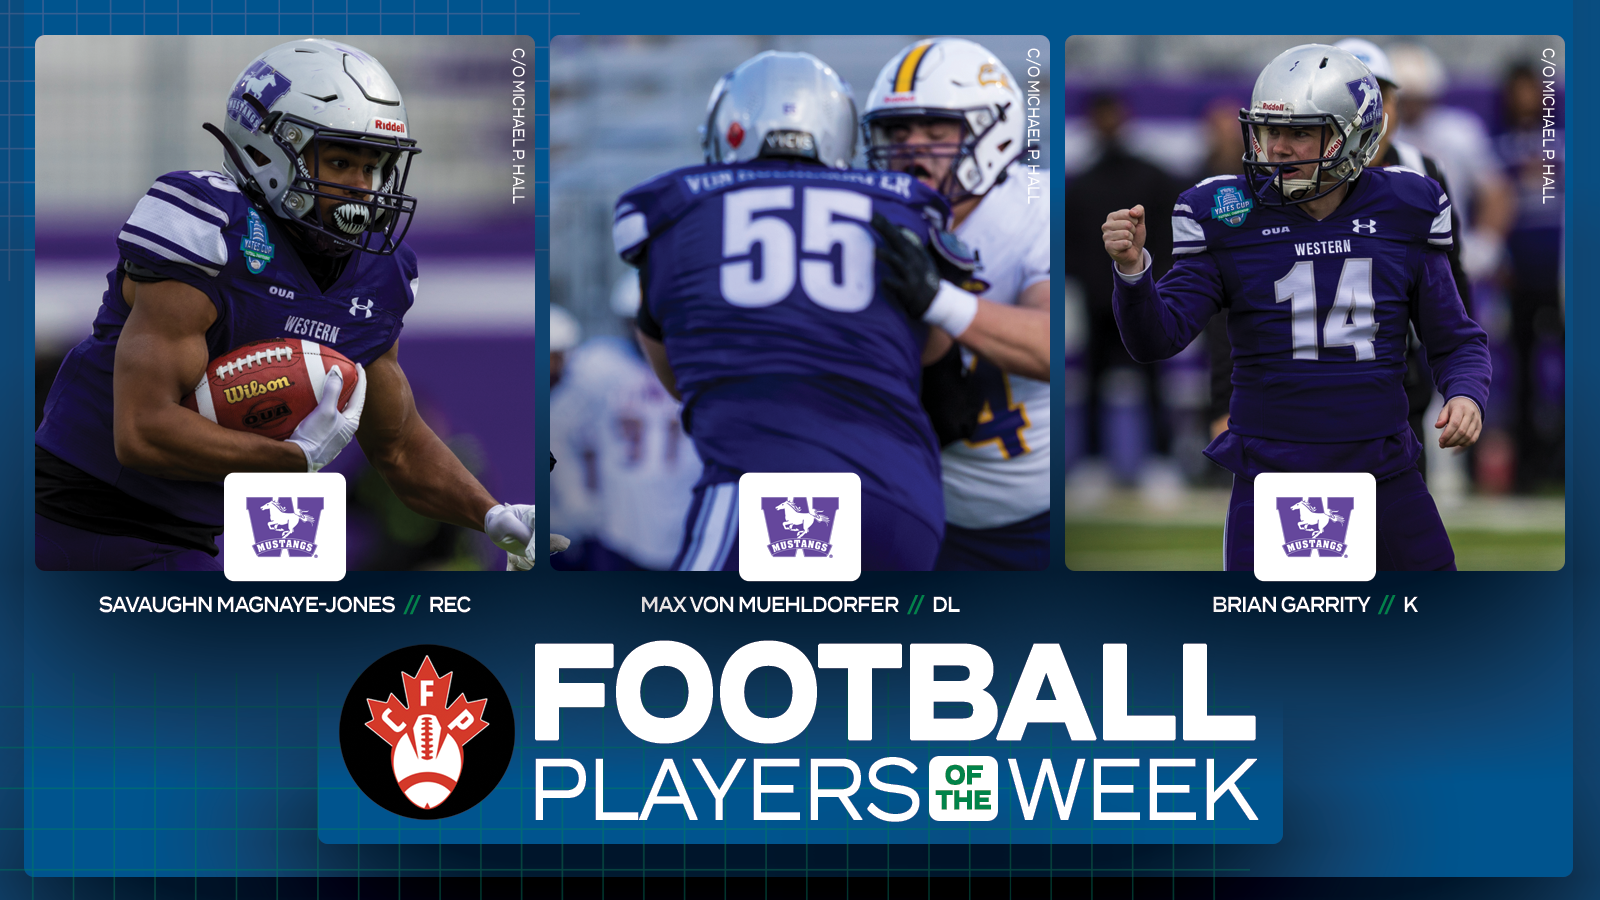 Graphic on predominantly blue background featuring action photos of Western's Savaughn Magnaye-Jones, Max Von Muehldorfer, and Brian Garrity, with the Canadian Football Perspective logo and white text reading, 'Football Players of the Week' included below them